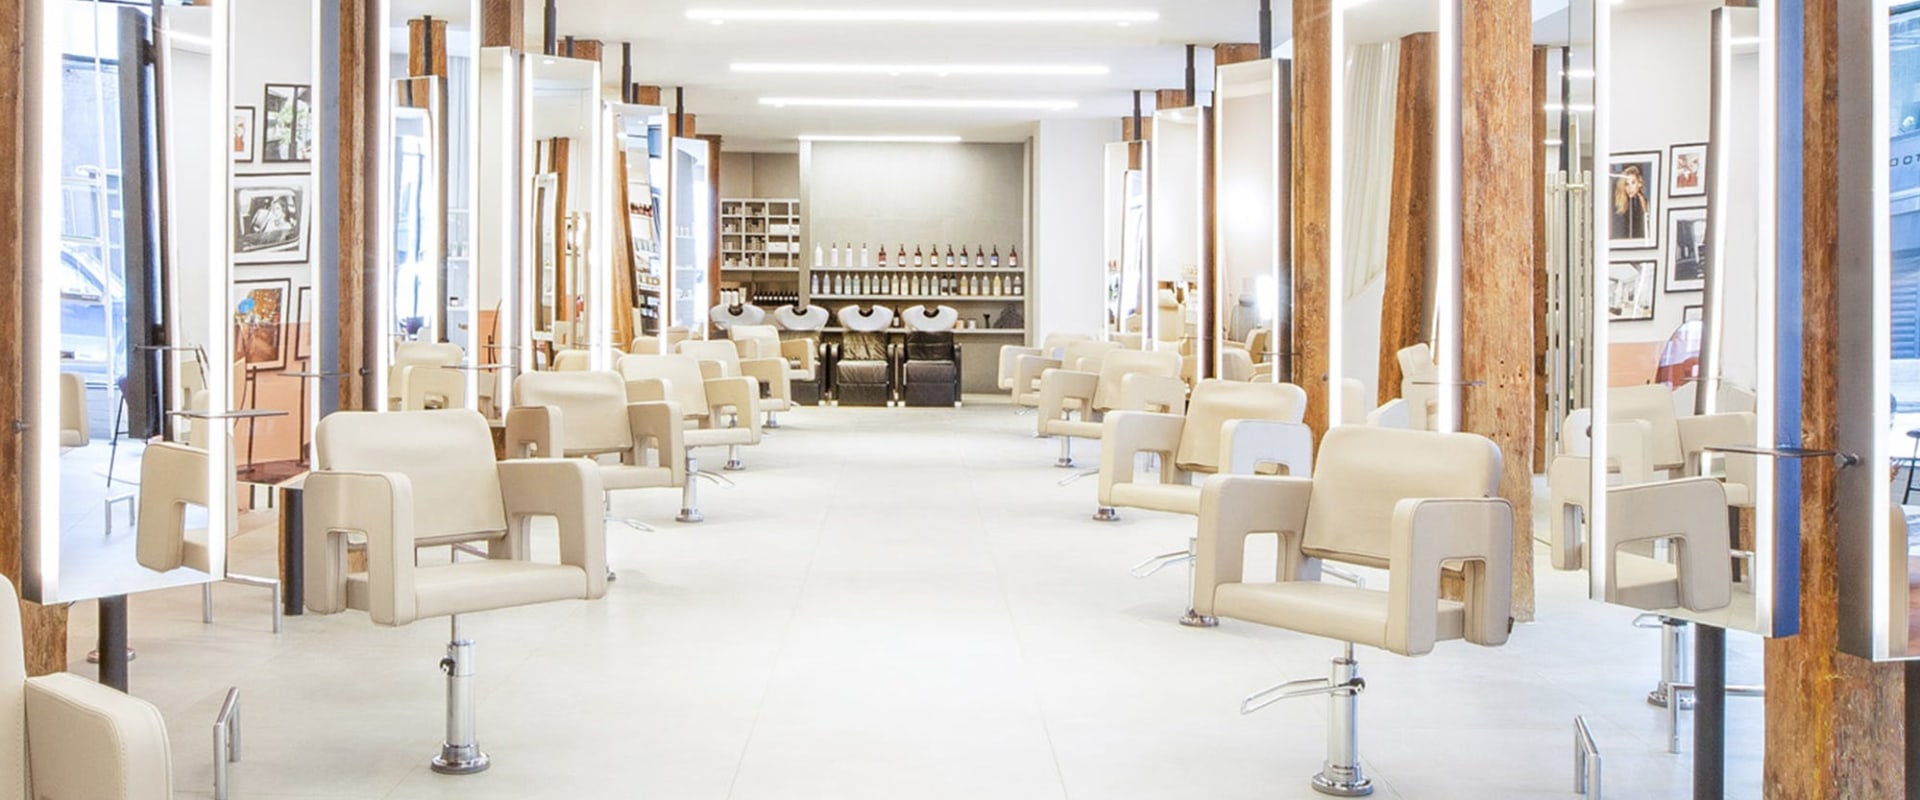 Stay Connected While You Get Pampered: Exploring Beauty Salons in London with Free Wi-Fi